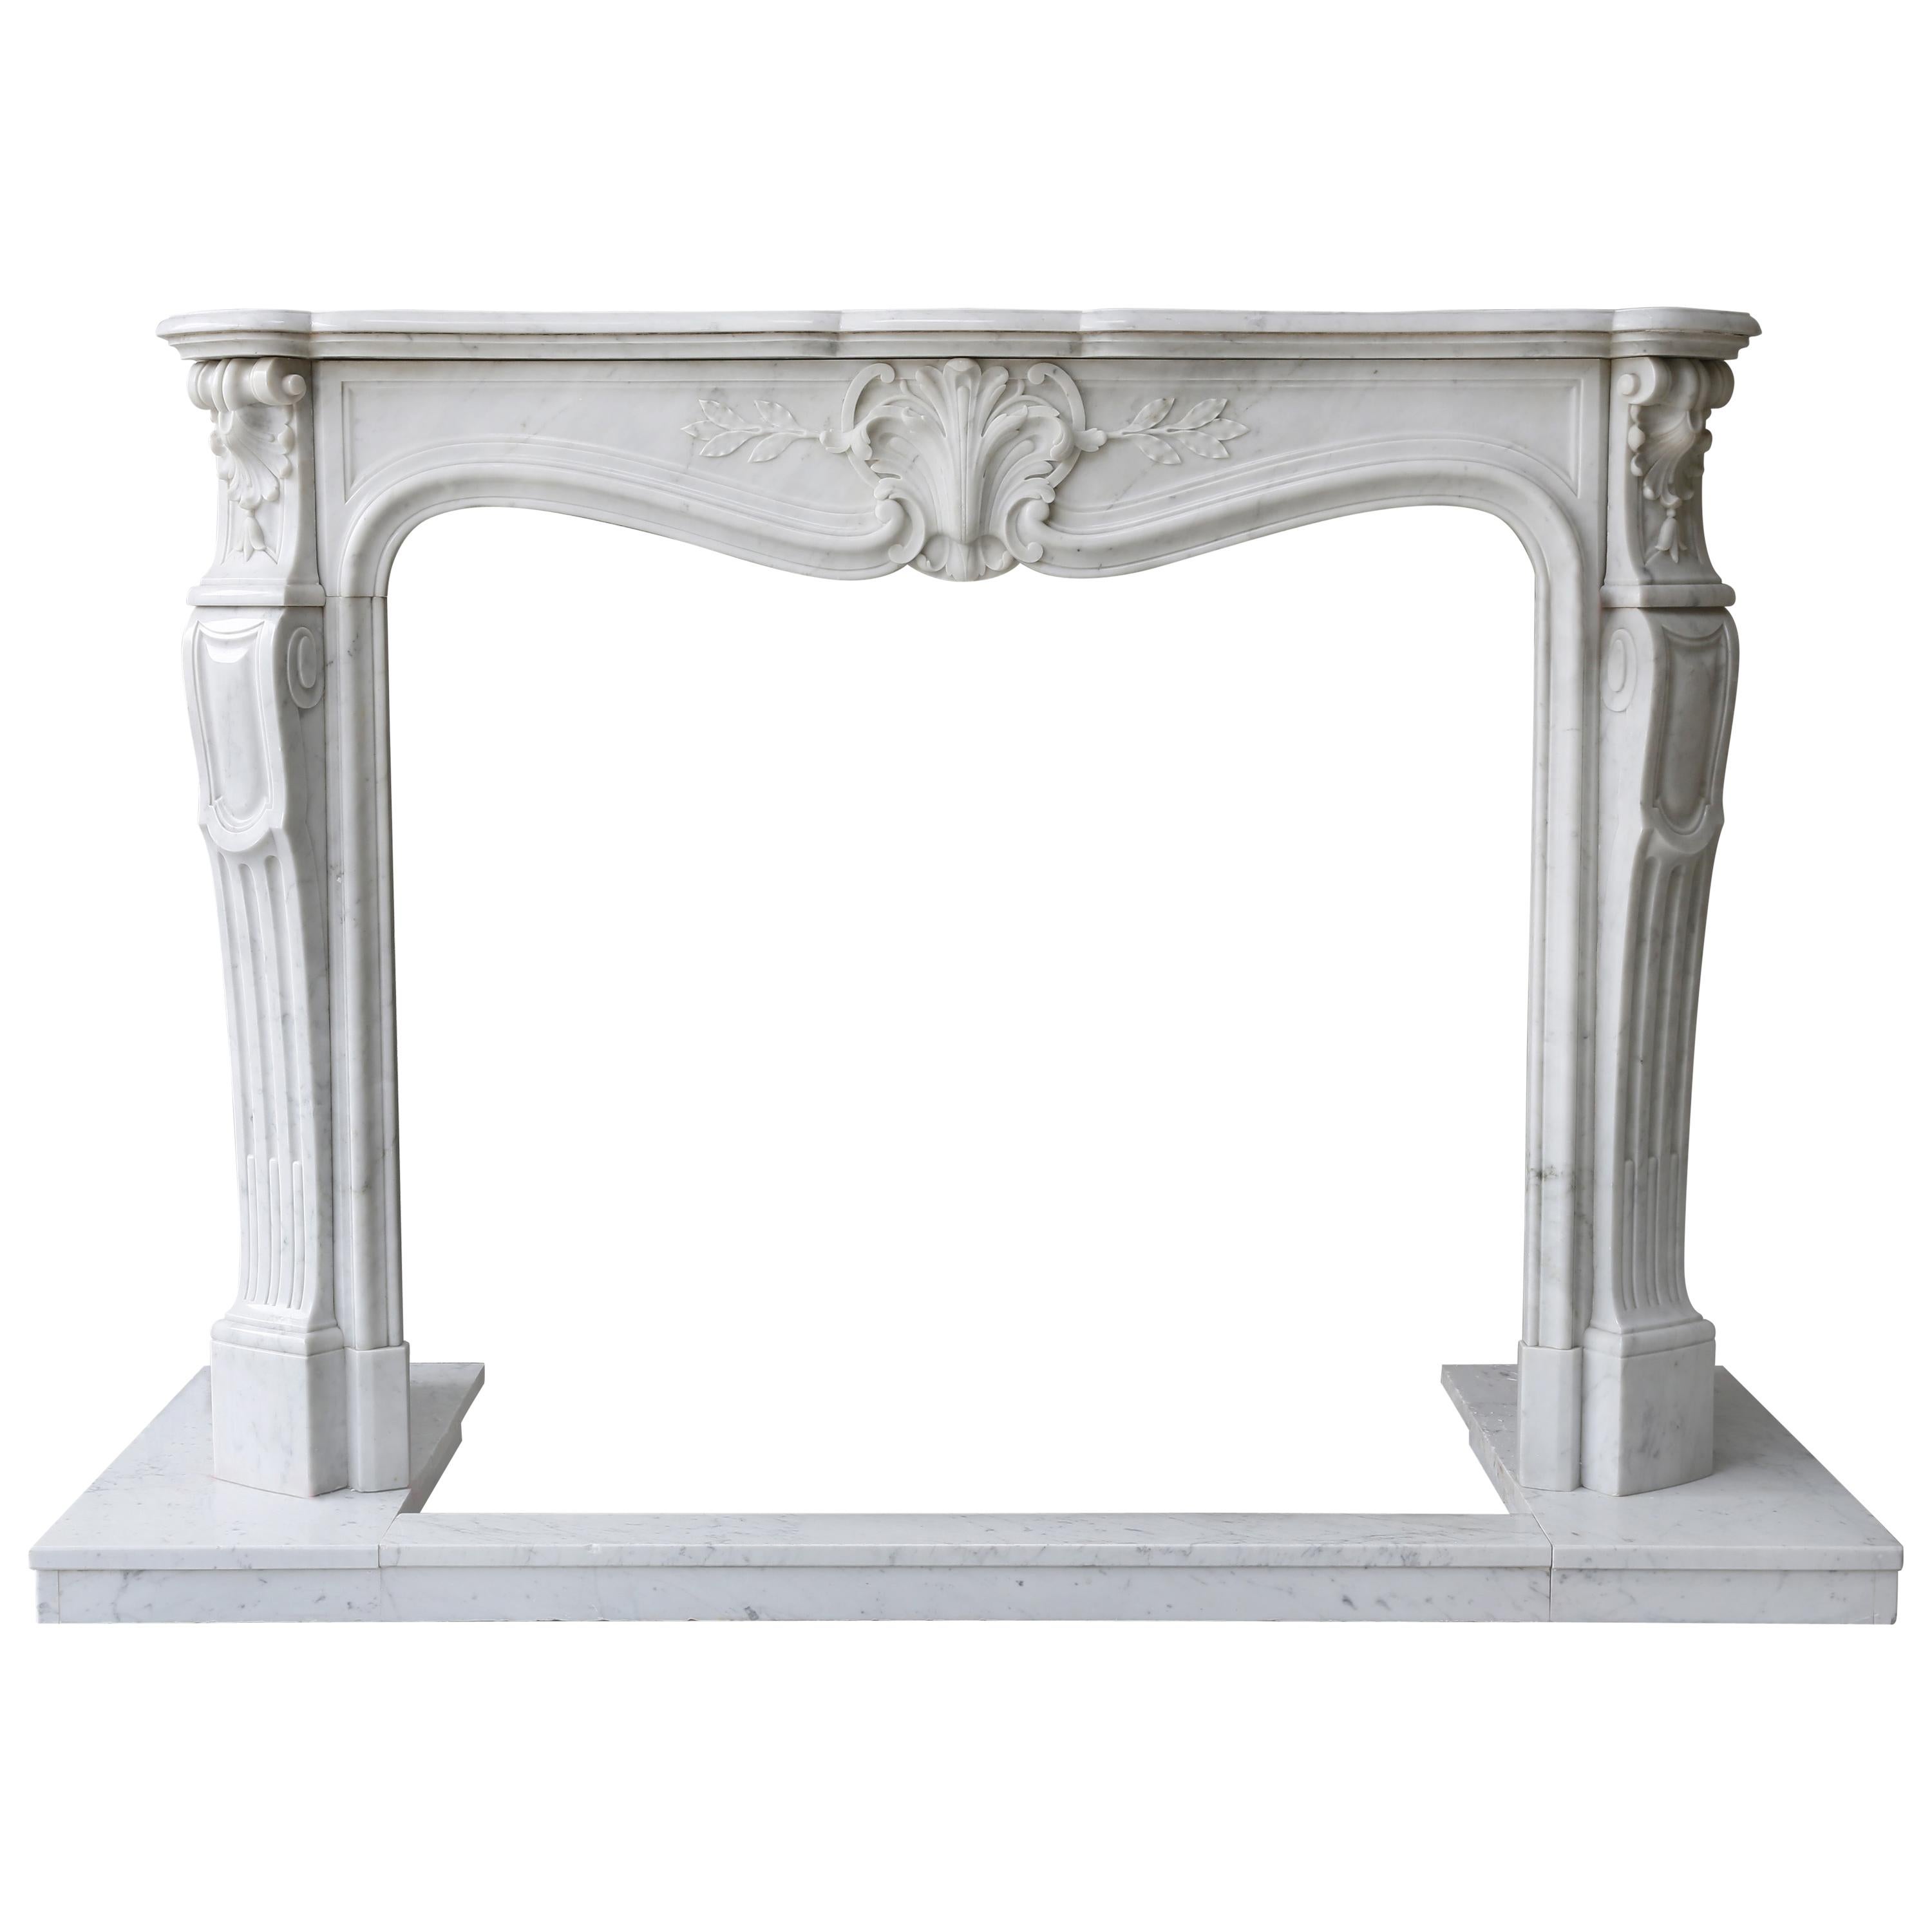 Mantel of White Carrara Marble in Style of Louis XV from the 19th Century